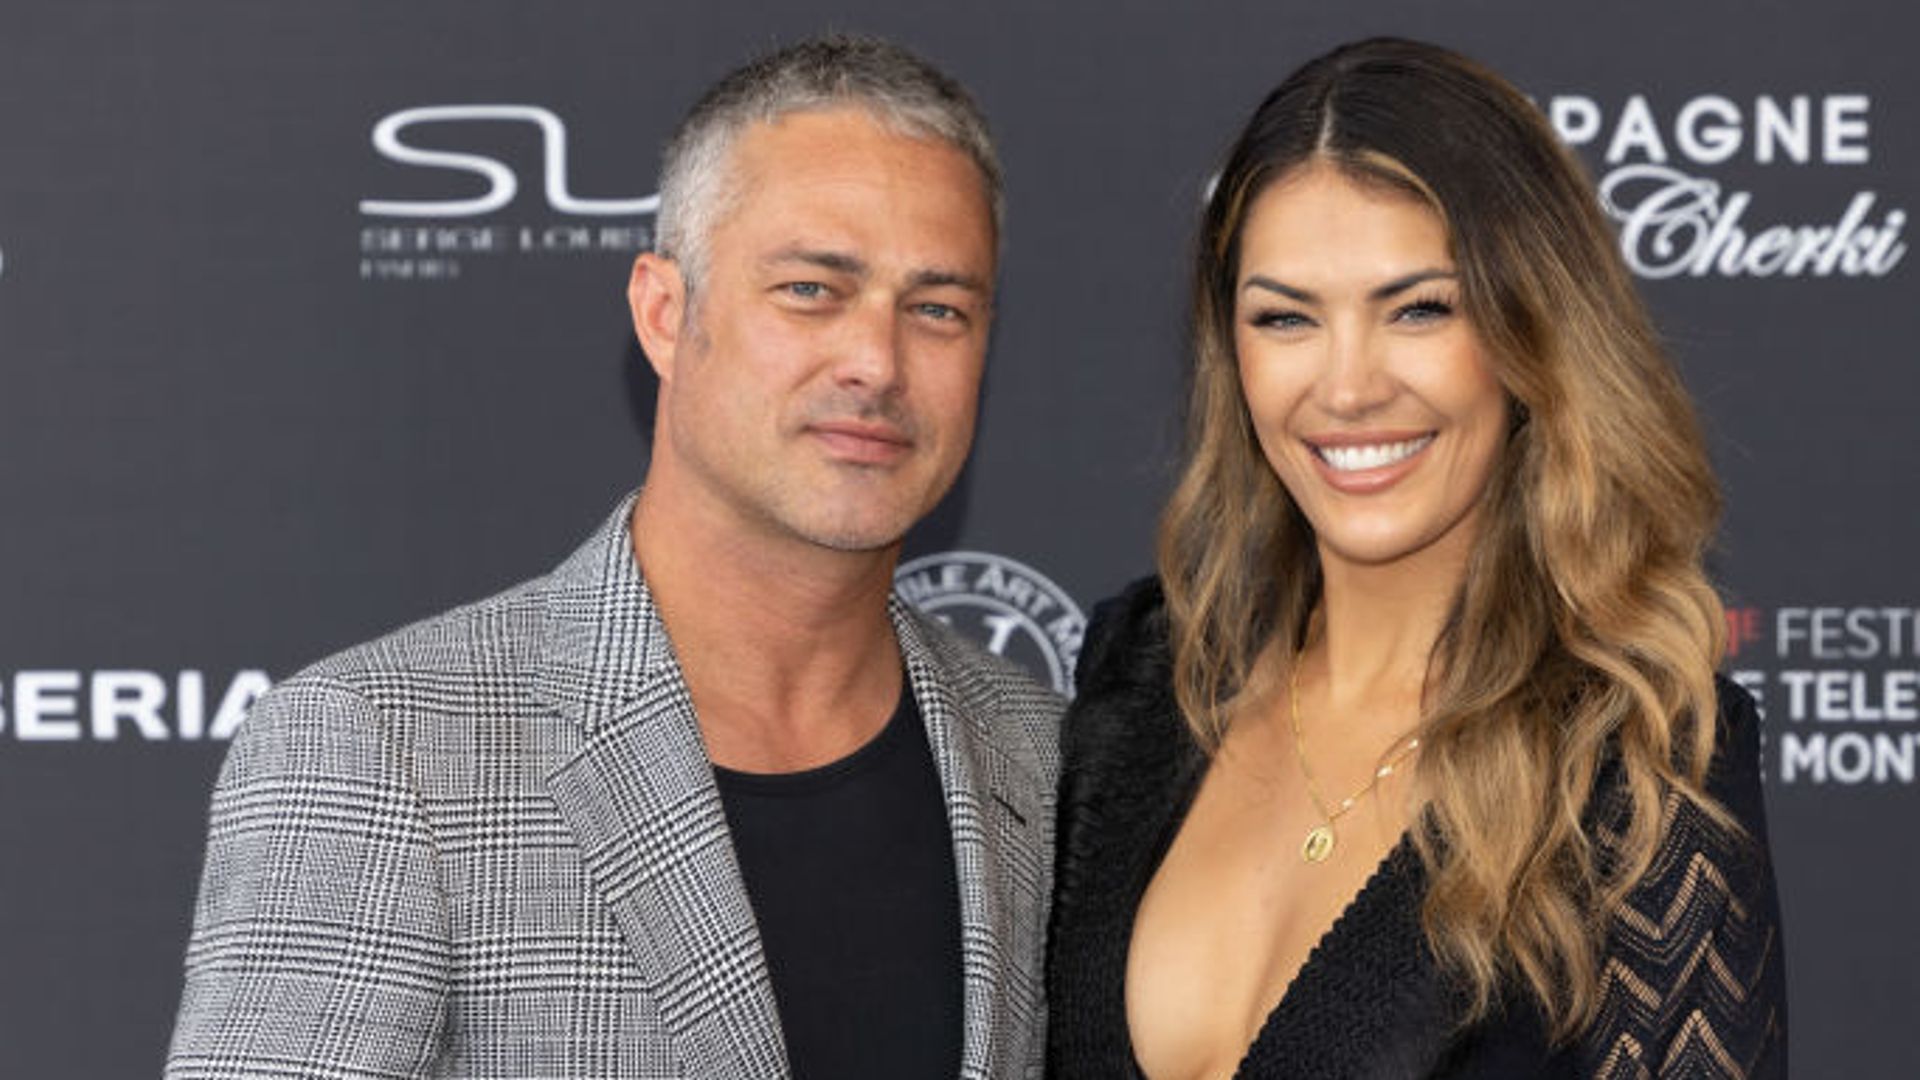 Taylor Kinney and Ashley Cruger attends the opening ceremony during the 61st Monte Carlo TV Festival on June 17, 2022 in Monte-Carlo, Monaco.